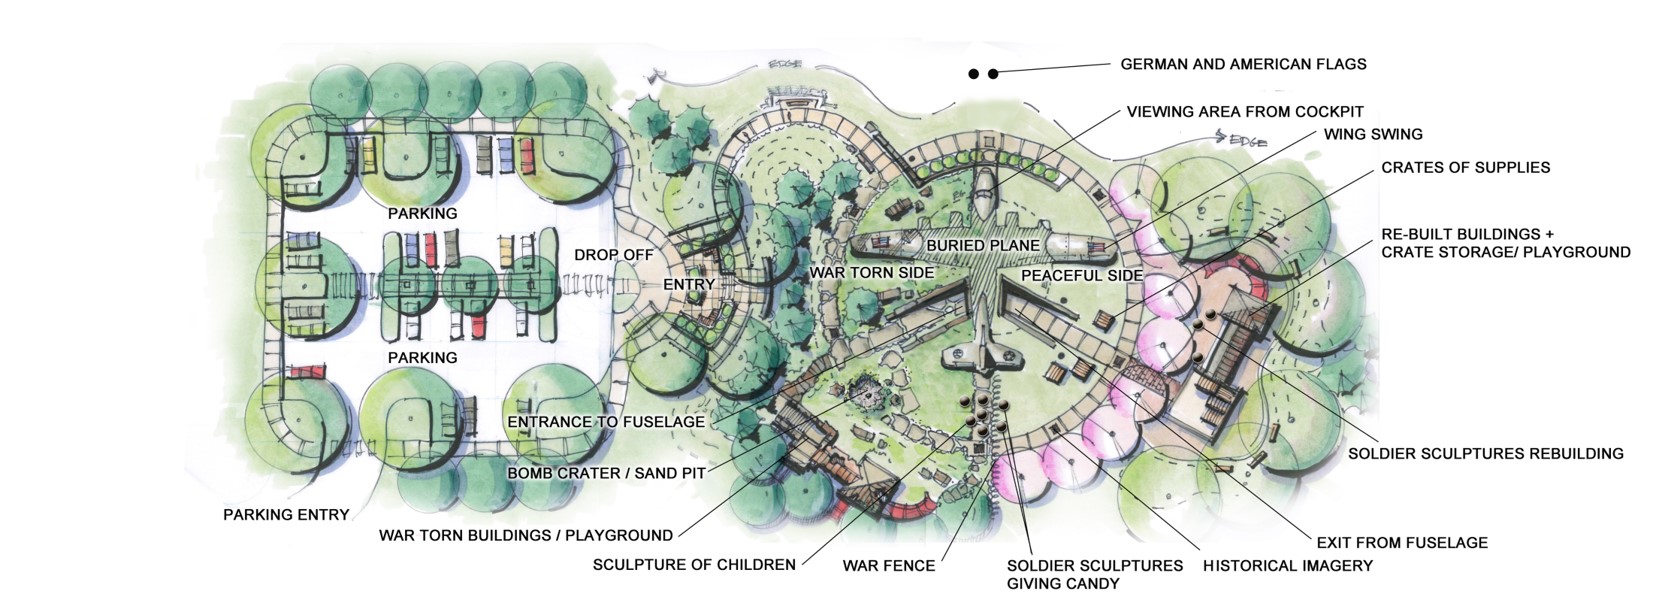  THERE HAVE BEEN NUMBERLESS WAR MEMORIALS DESIGNED TO HONOR THOSE WHO HAVE FOUGHT IN WARS THROUGHOUT THE WORLD. PEACE AND LOVE MEMORIAL PARK IS NOT JUST INTENDED TO MEMORIALIZE THE CANDY BOMBER STORY, BUT HAS ALSO BEEN DESIGNED TO USE THE CANDY BOMBE